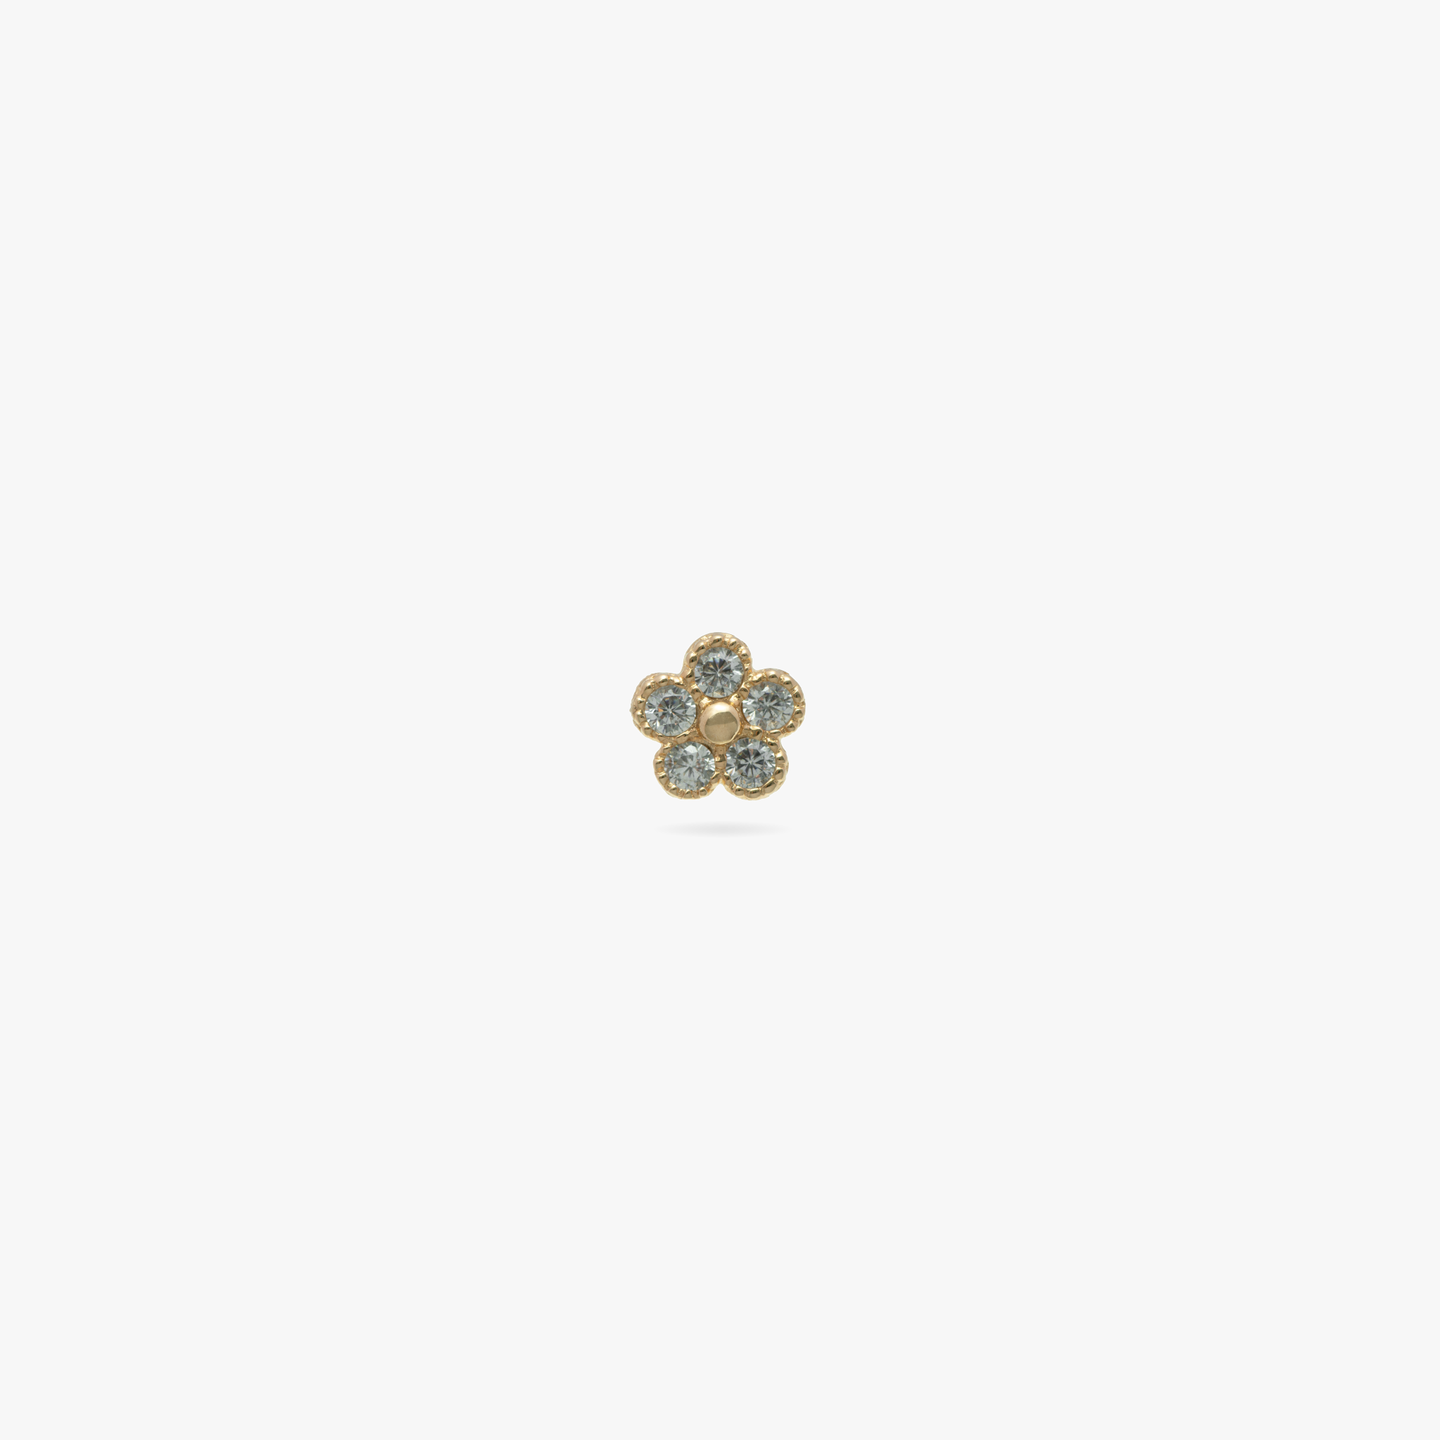 This is a 14k gold stud with CZ's in the shape of a daisy color:null|gold